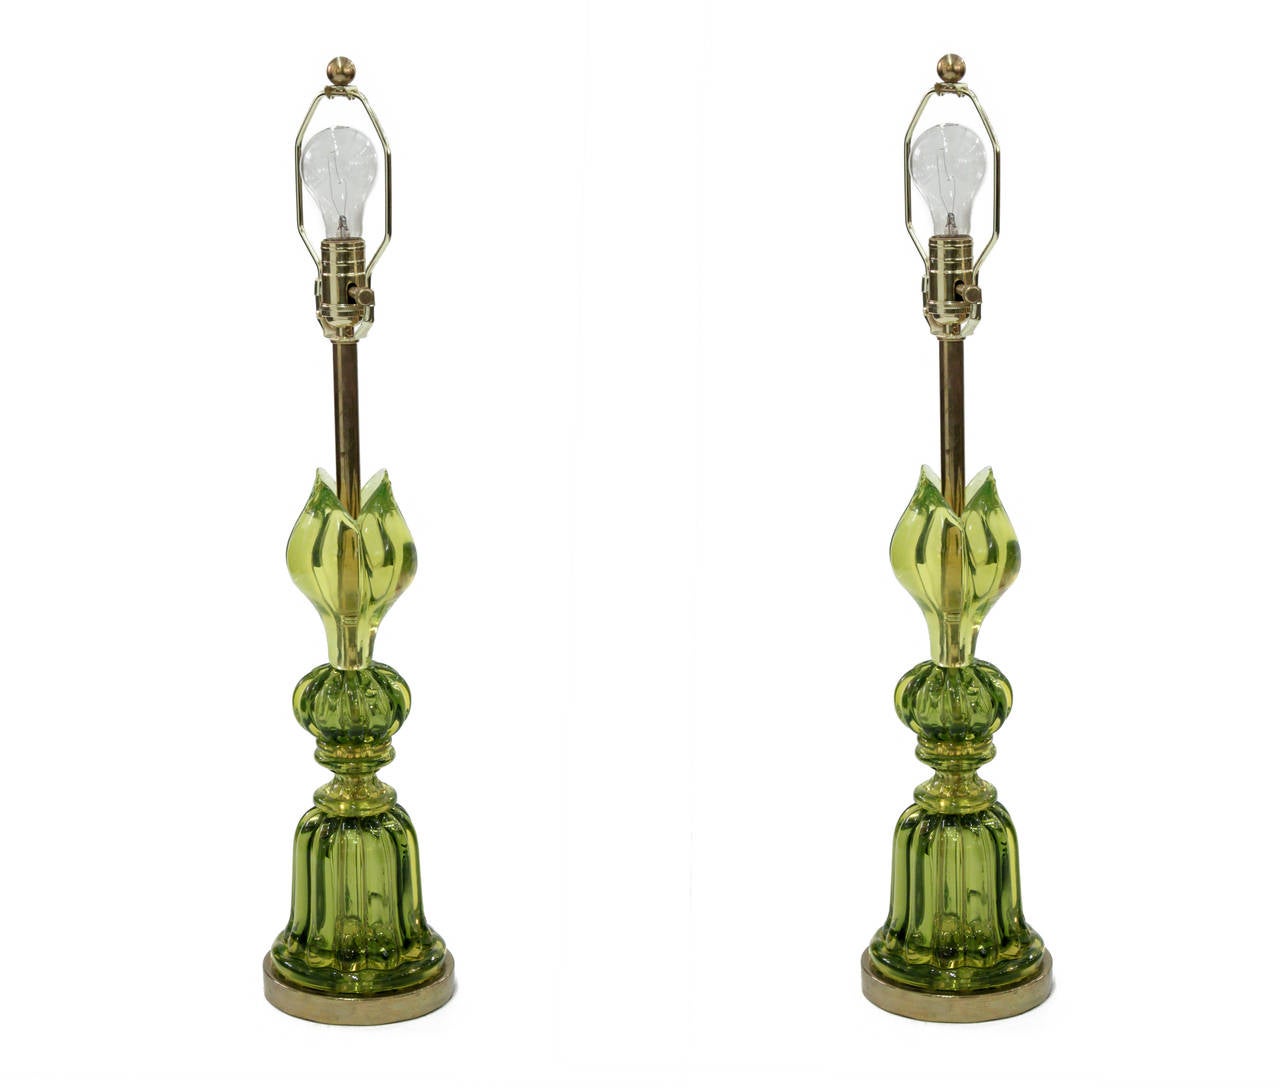 Pair of exceptional handblown green glass table lamps, channeled and cinched by Seguso, Murano Italy, 1950s.
Lamp shades shown in photo are 16 inches wide by 10 inches deep.